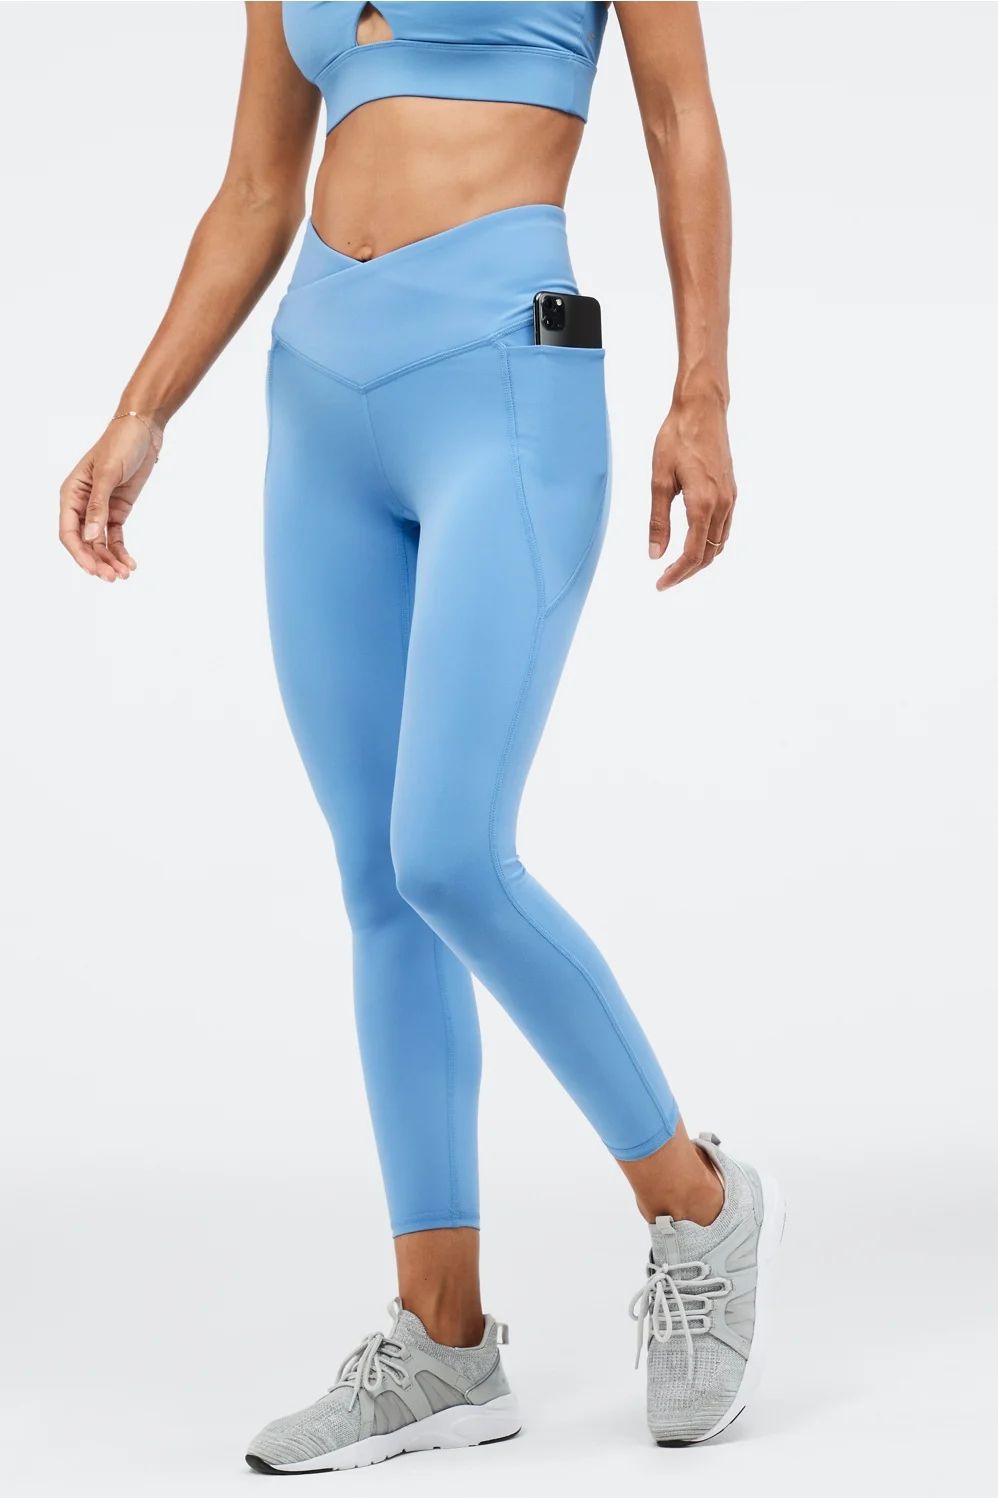 High-Waisted PureLuxe Crossover 7/8 | Fabletics